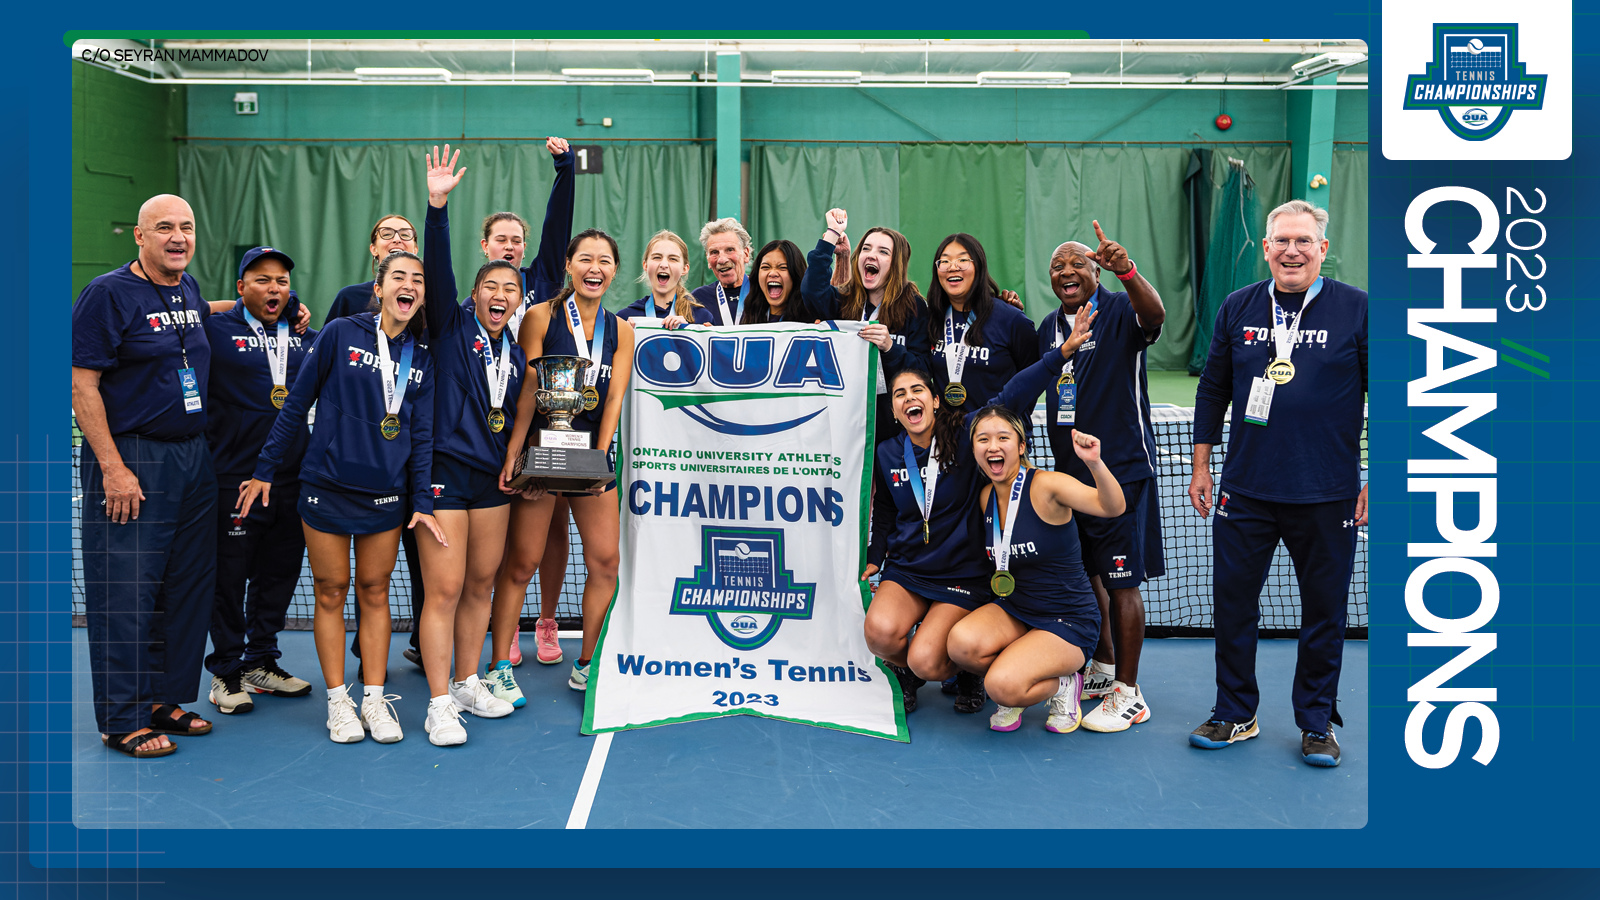 Predominantly blue graphic covered mostly by 2023 OUA Women's Tennis Championship banner photo, with the corresponding championship logo and white text reading '2023 Champions' on the right side